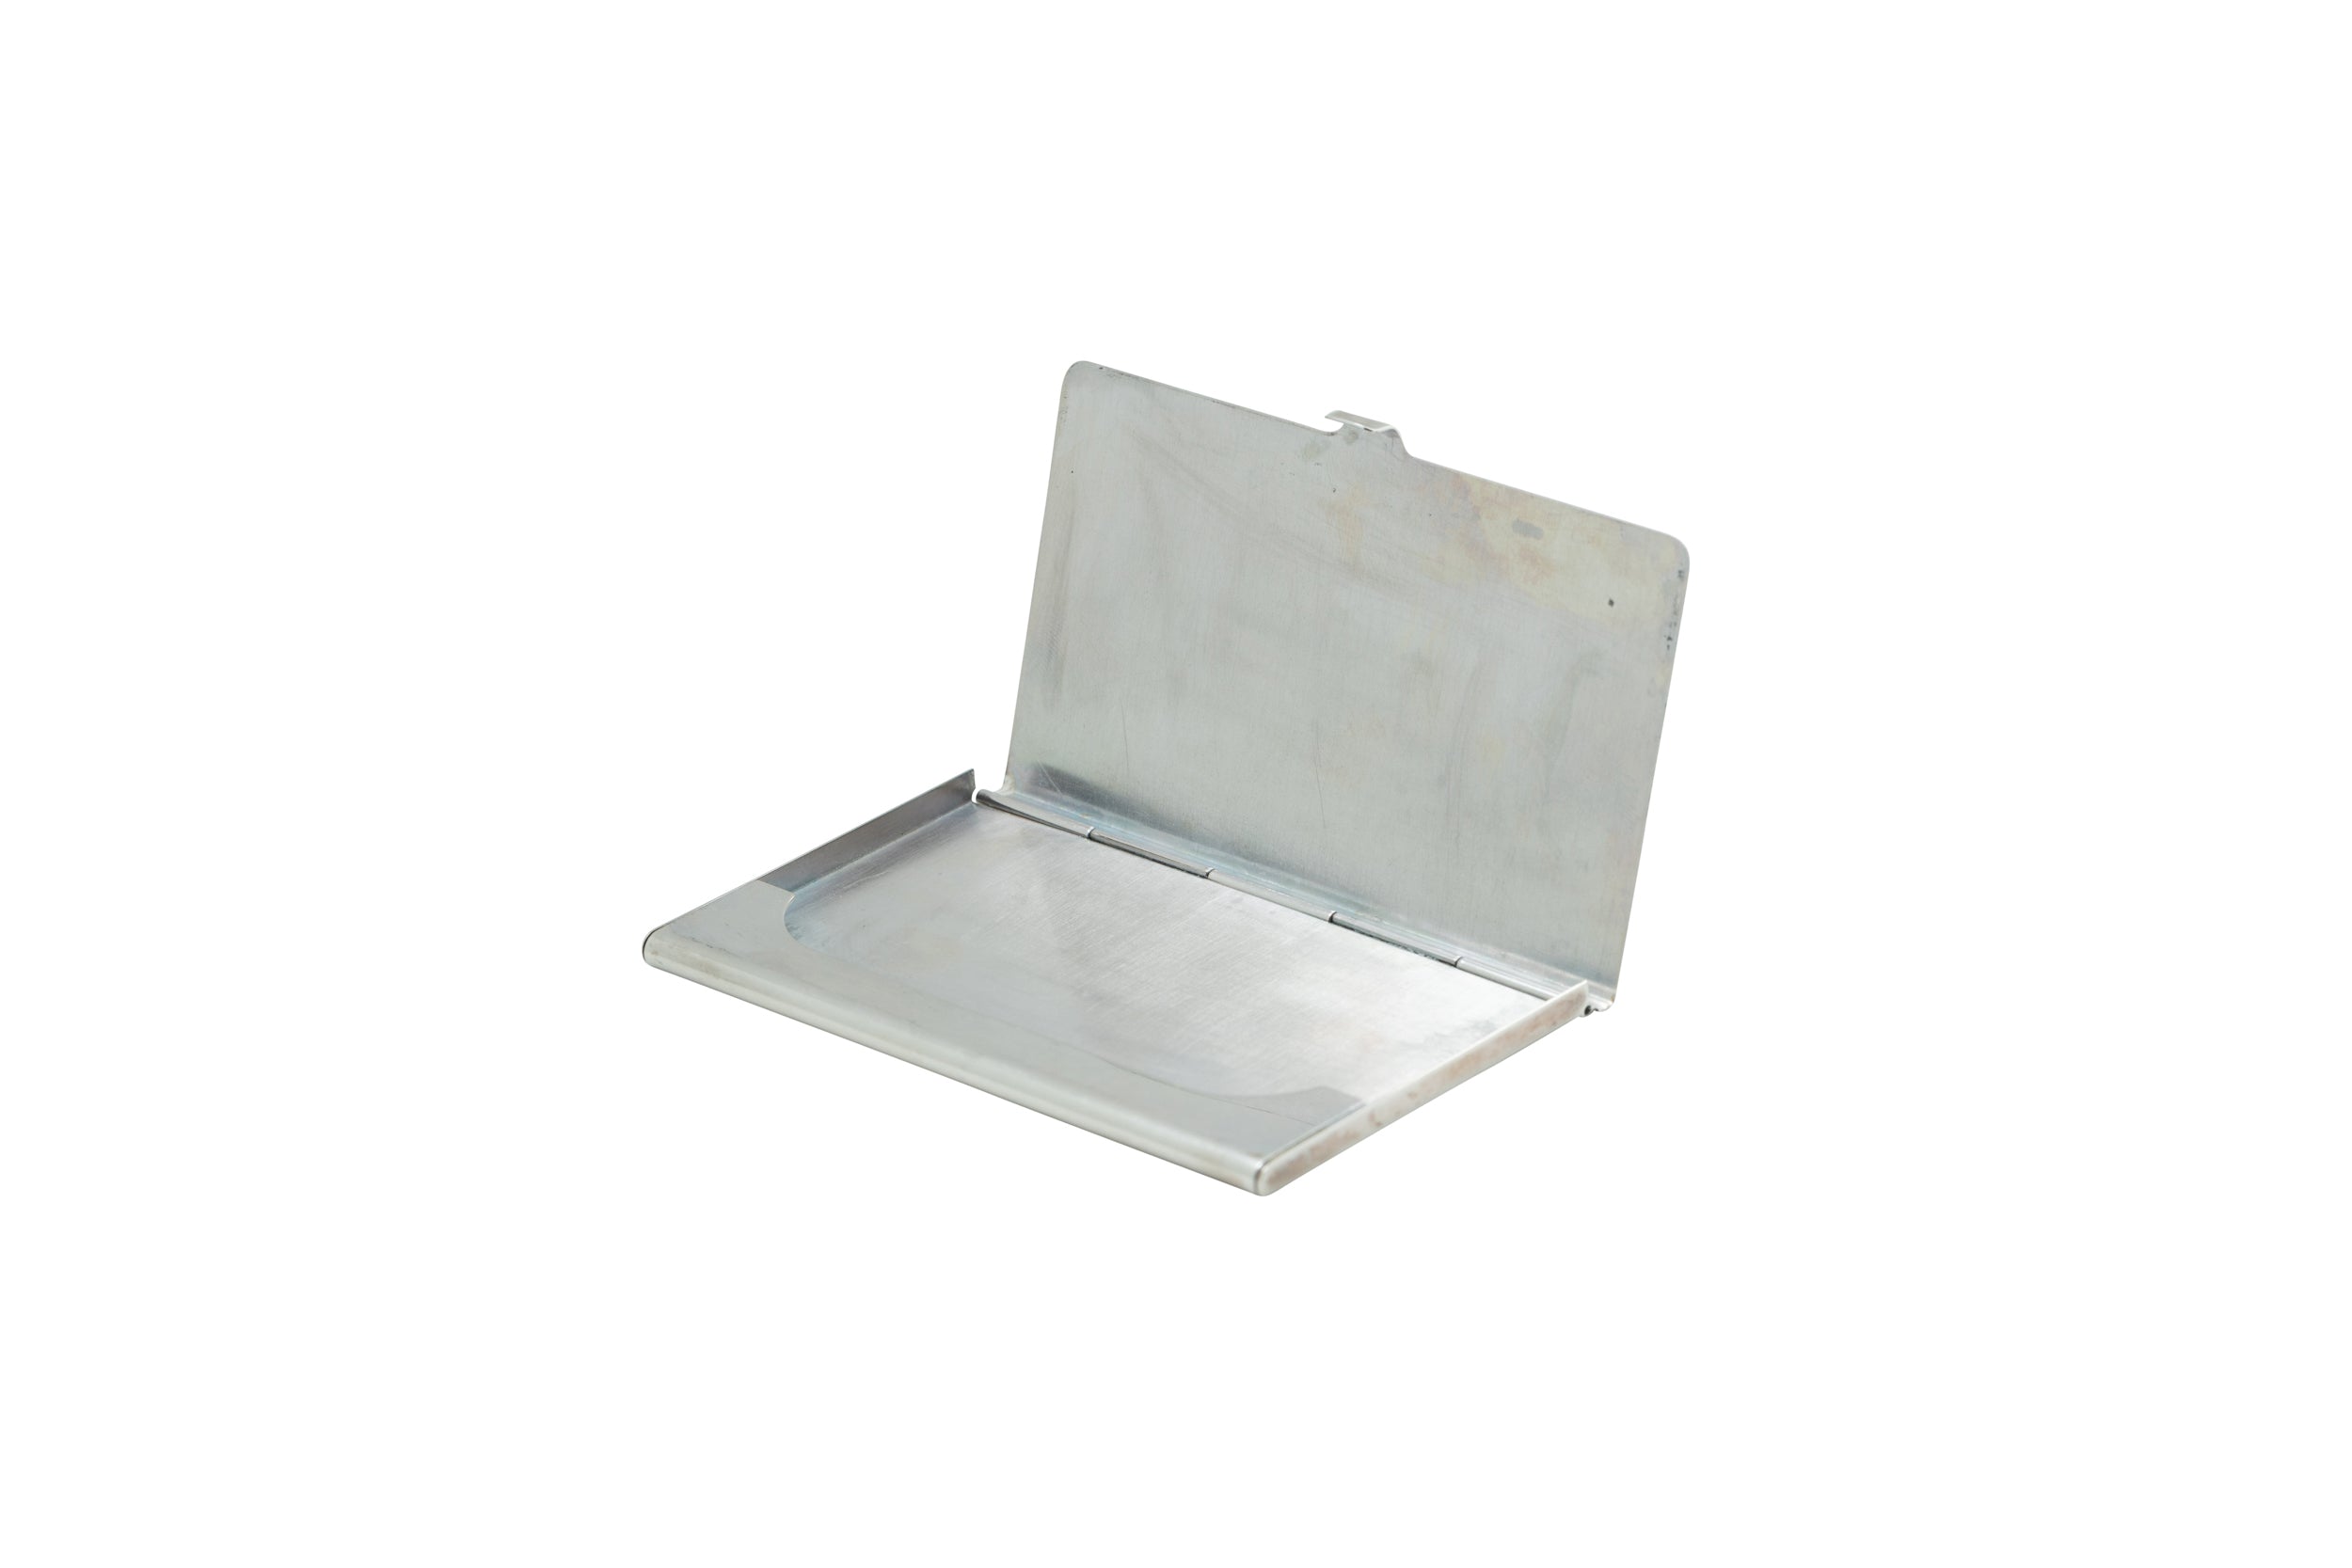 Tiffany & Co. Sterling Silver Card Case – Analog:Shift